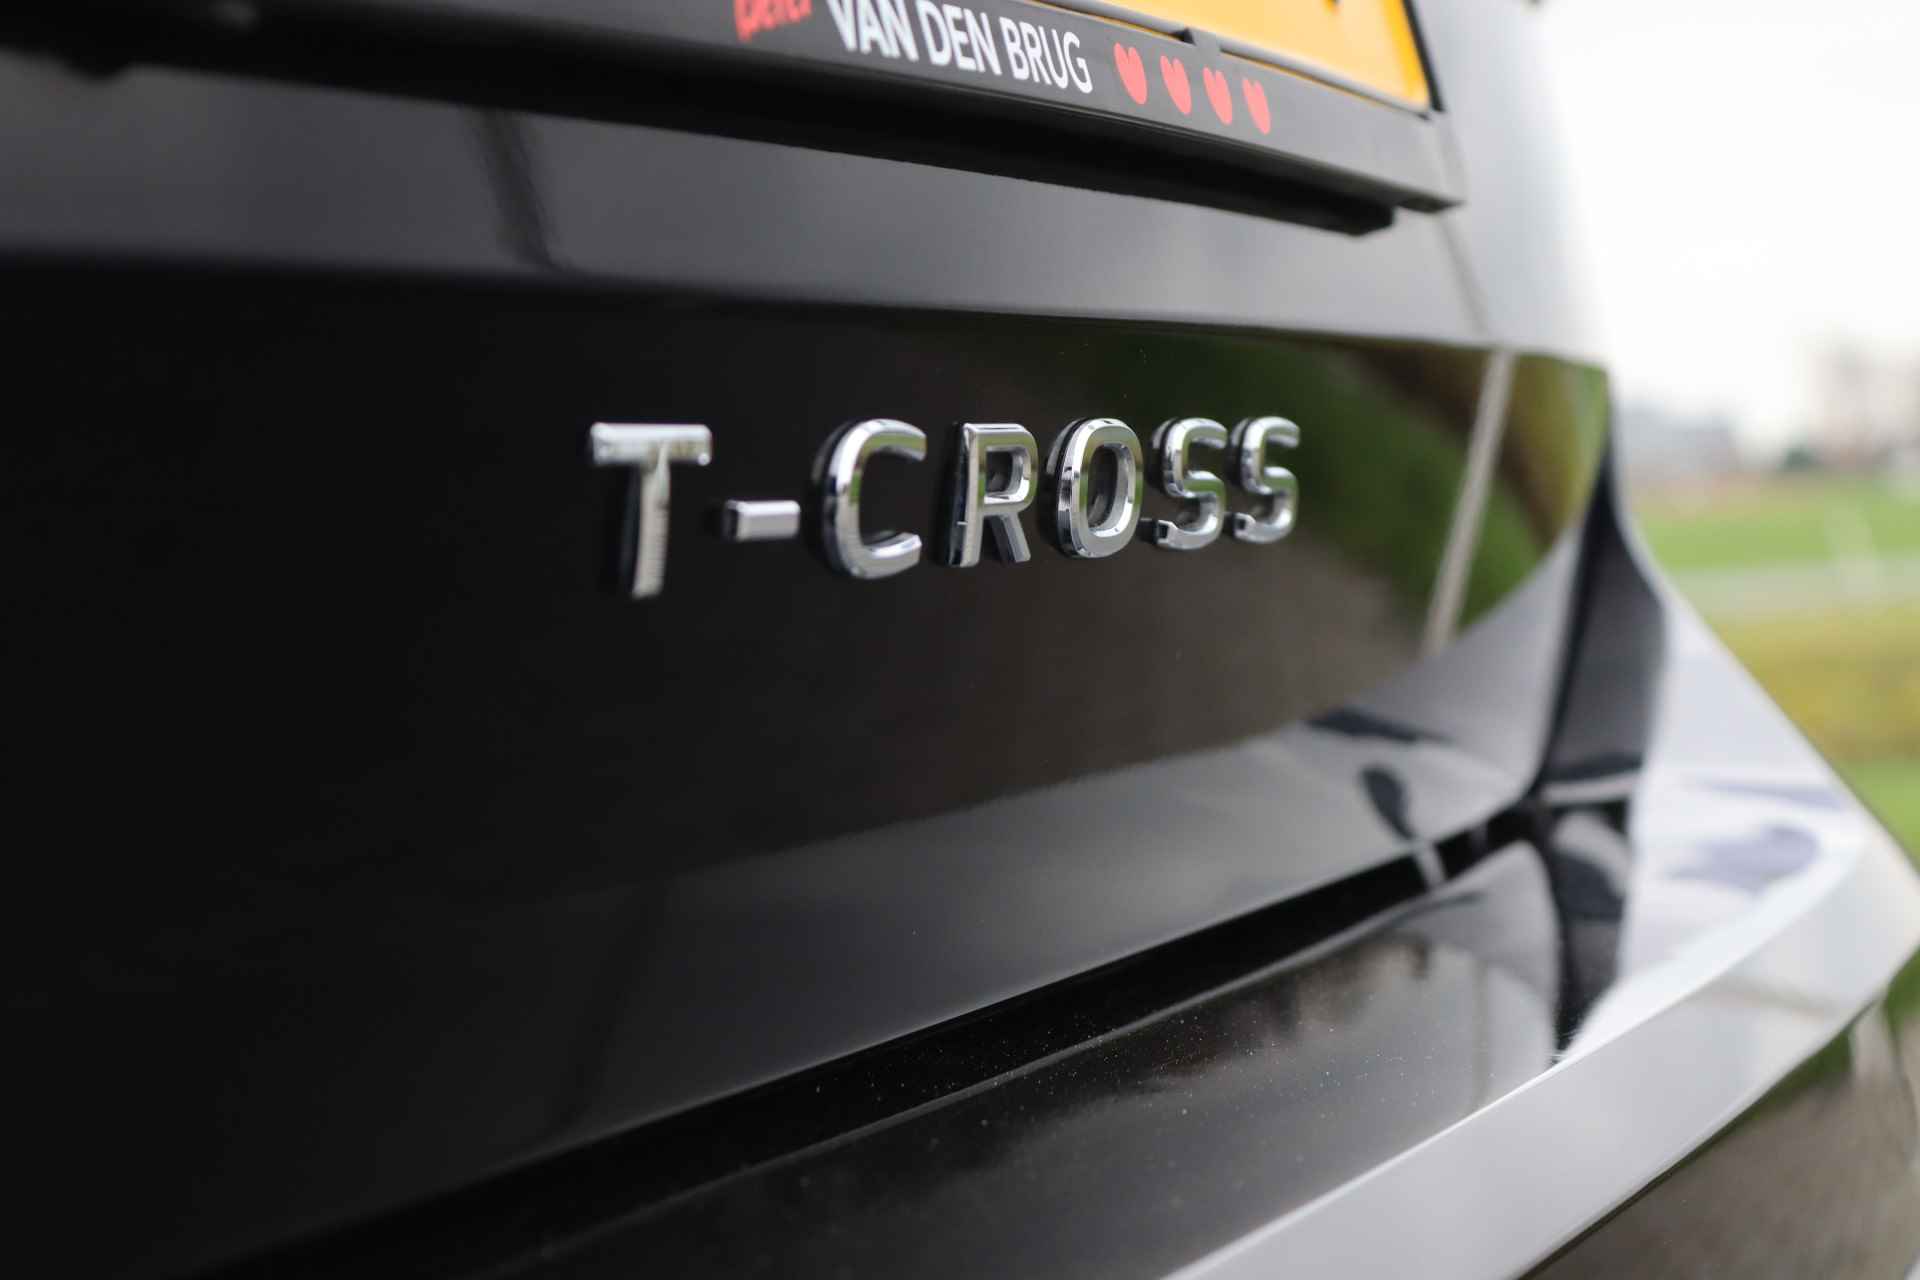 Volkswagen T-Cross 1.0 TSI 95 pk Life | App-connect  | PDC voor & achter | 16" LM | Adaptive Cruise - 12/38